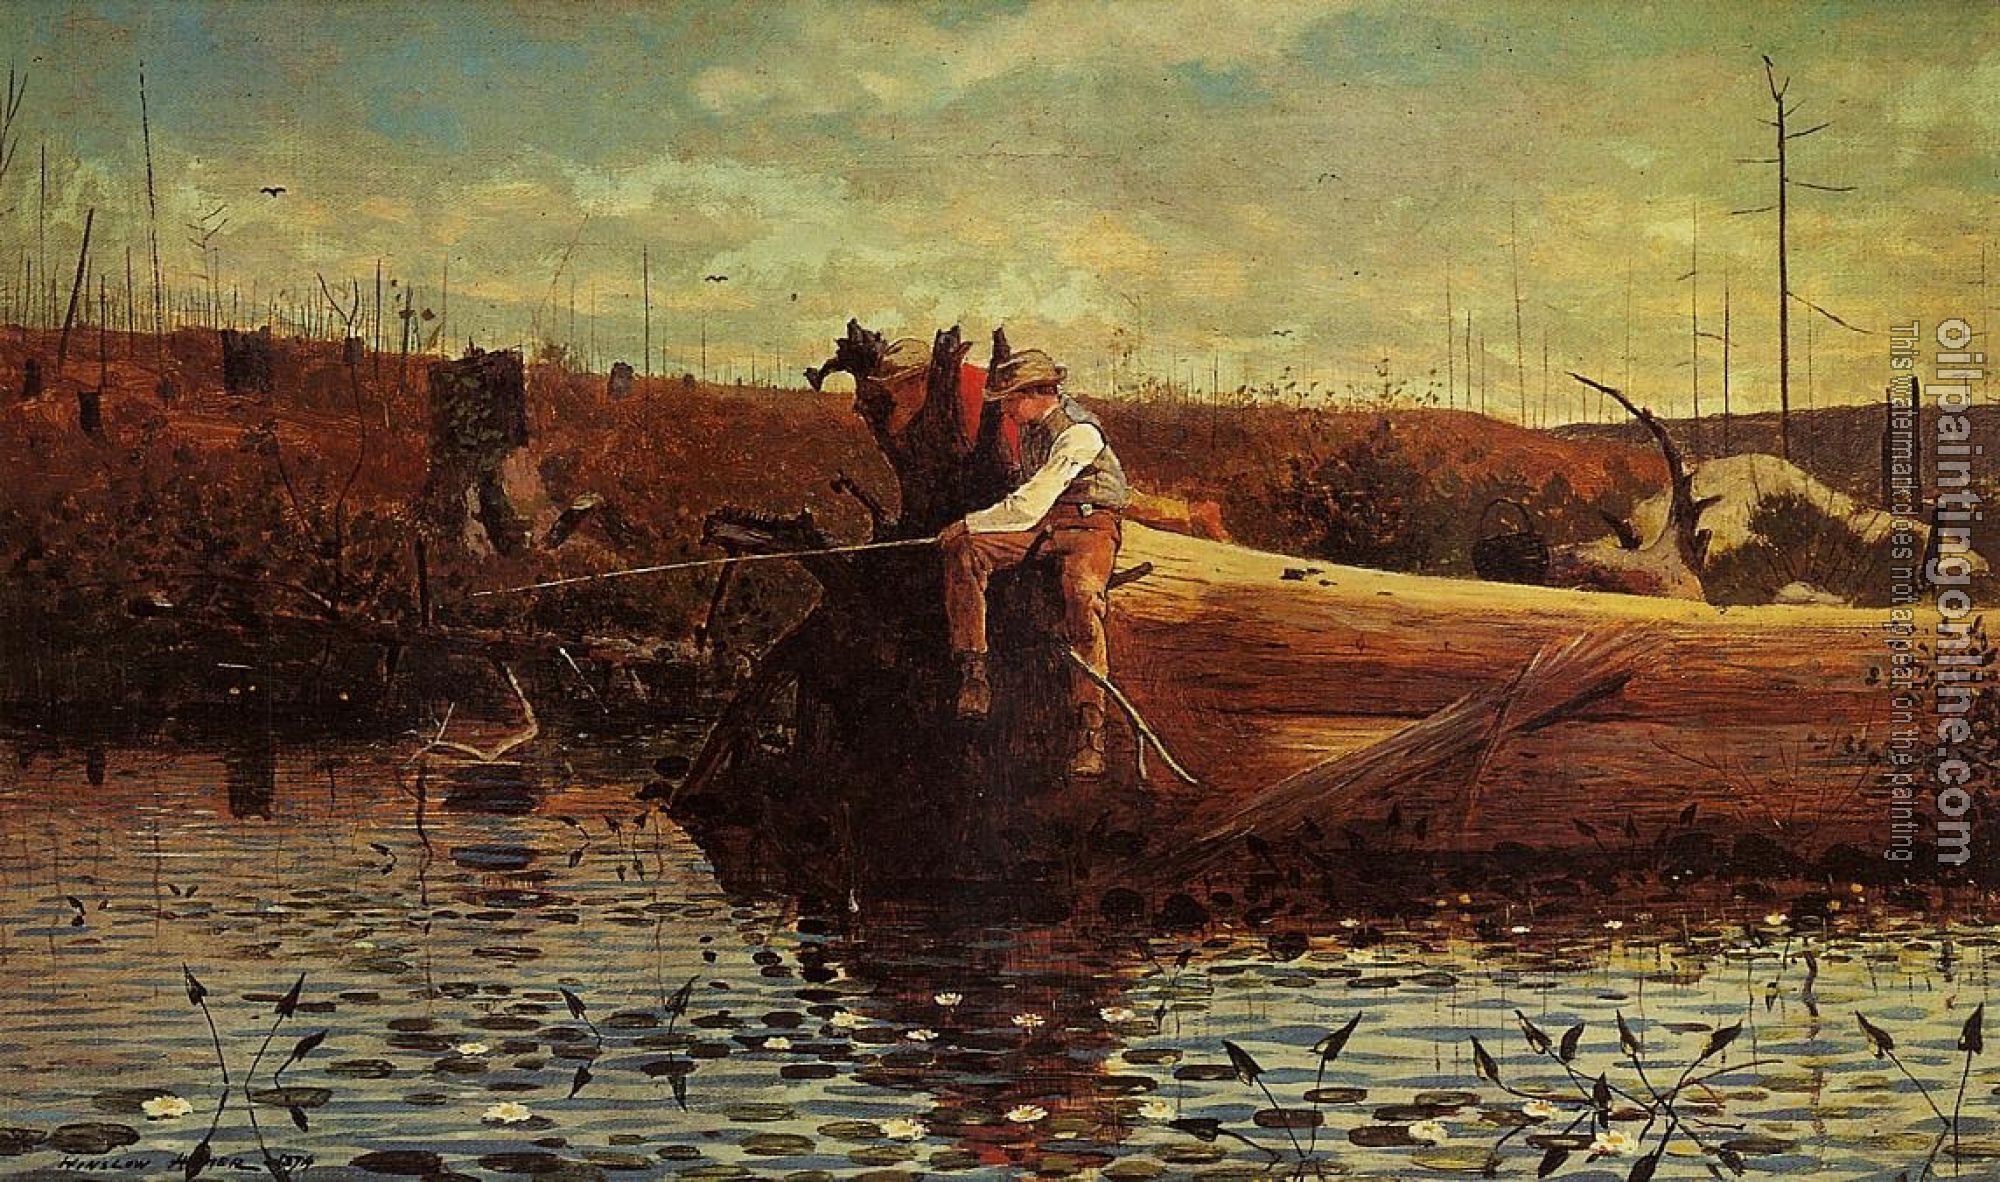 Homer, Winslow - Waiting for a Bite